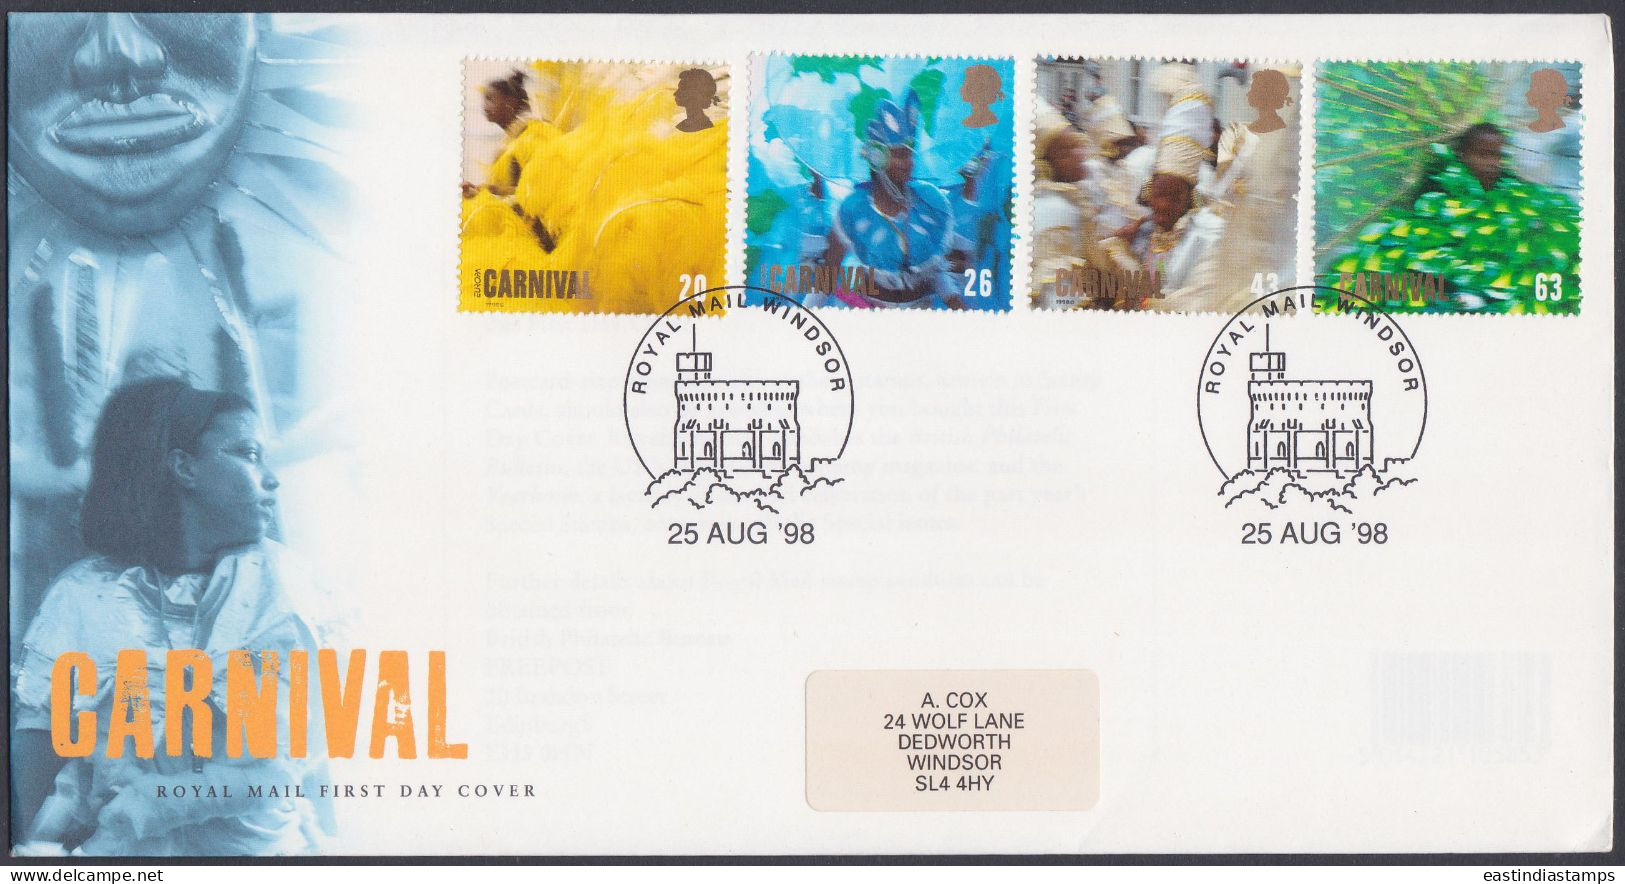 GB Great Britain 1998 FDC Carnival, Festival, Revelry, Music, Culture, Pictorial Postmark, First Day Cover - Lettres & Documents